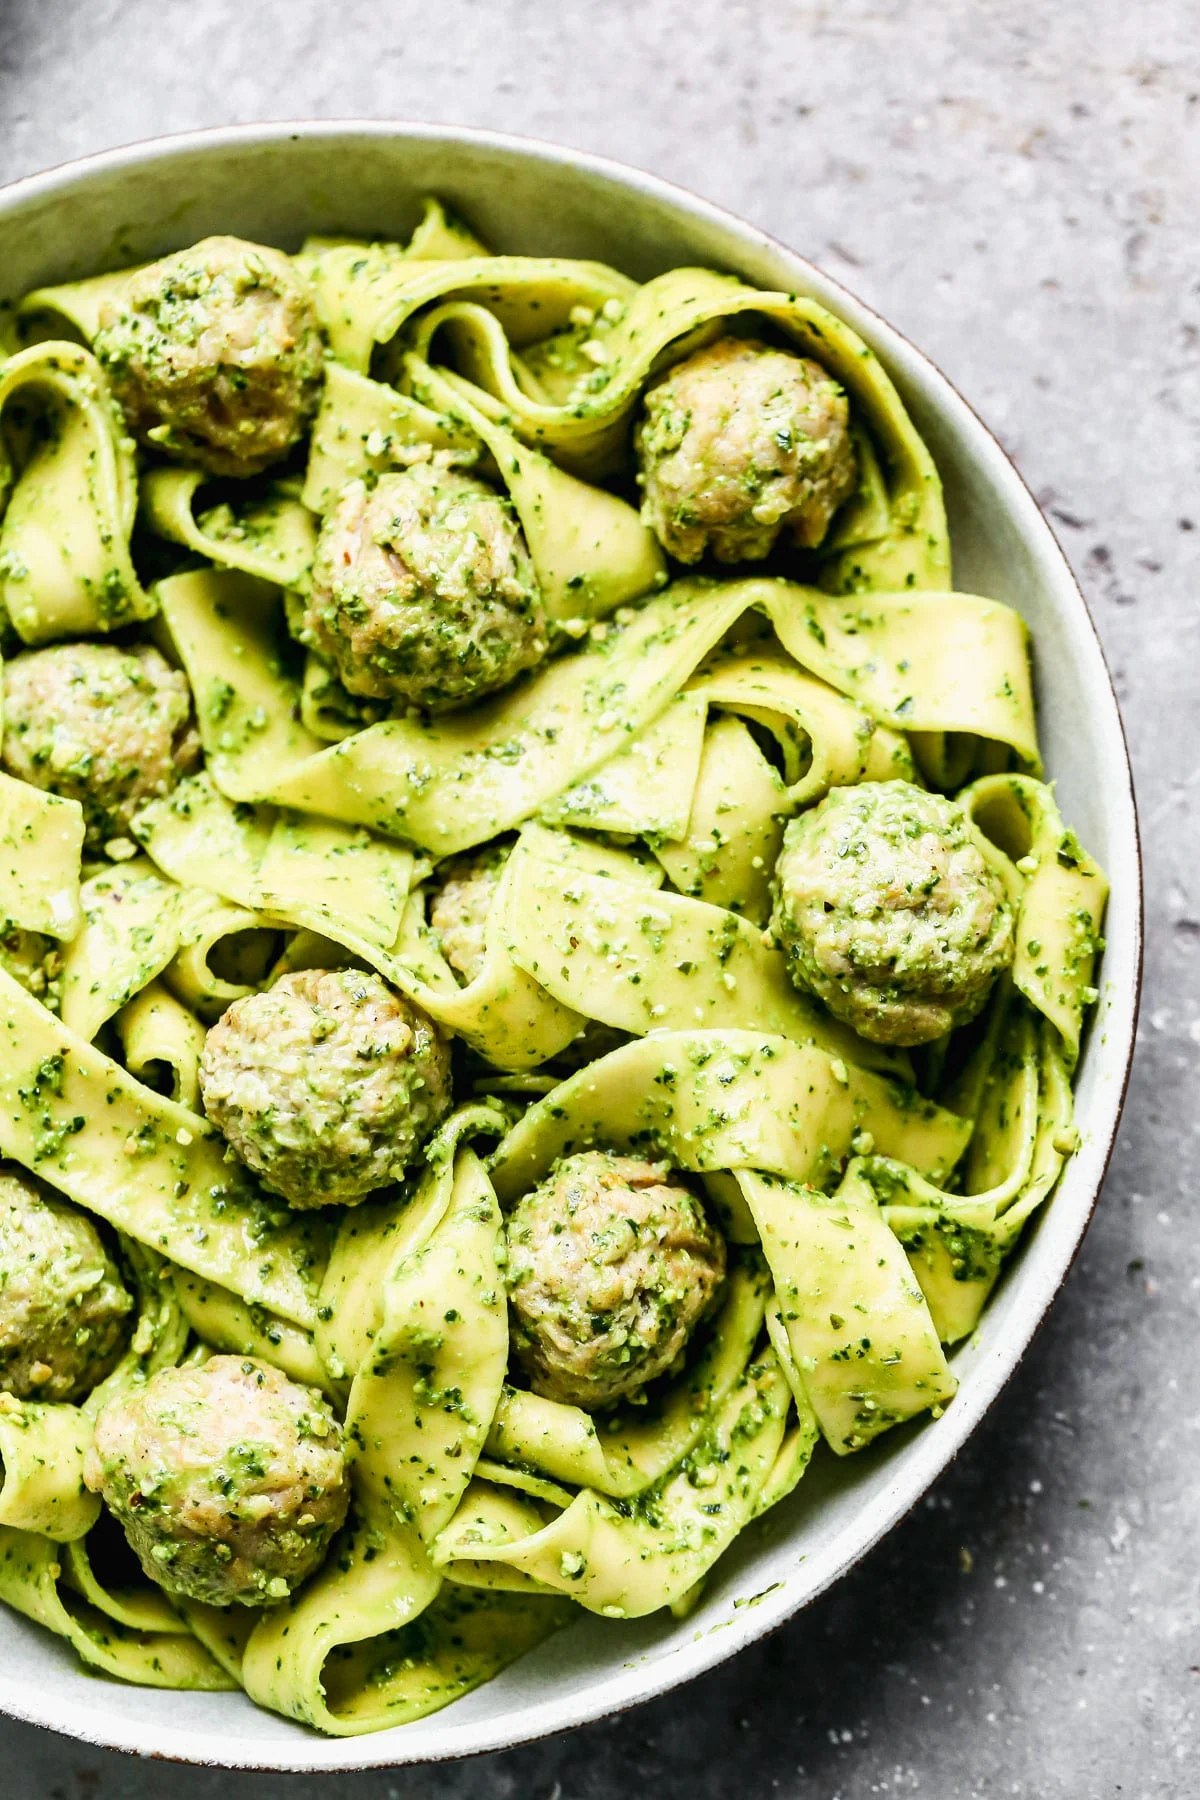 Twirly noodles tossed in a five-minute kale pesto, tender chicken meatballs, and plenty of nutty parmesan are the makings of our new favorite throw-it-together weeknight meal – Kale Pesto Pasta. Just because it's winter, doesn't mean we have to leave homemade pesto behind. Swapping out hearty wintery kale for a portion of the pesto brings a little seasonal aspect to our pesto and using crunchy almonds instead of pine nuts make this easy meal pocket-friendly as well. 